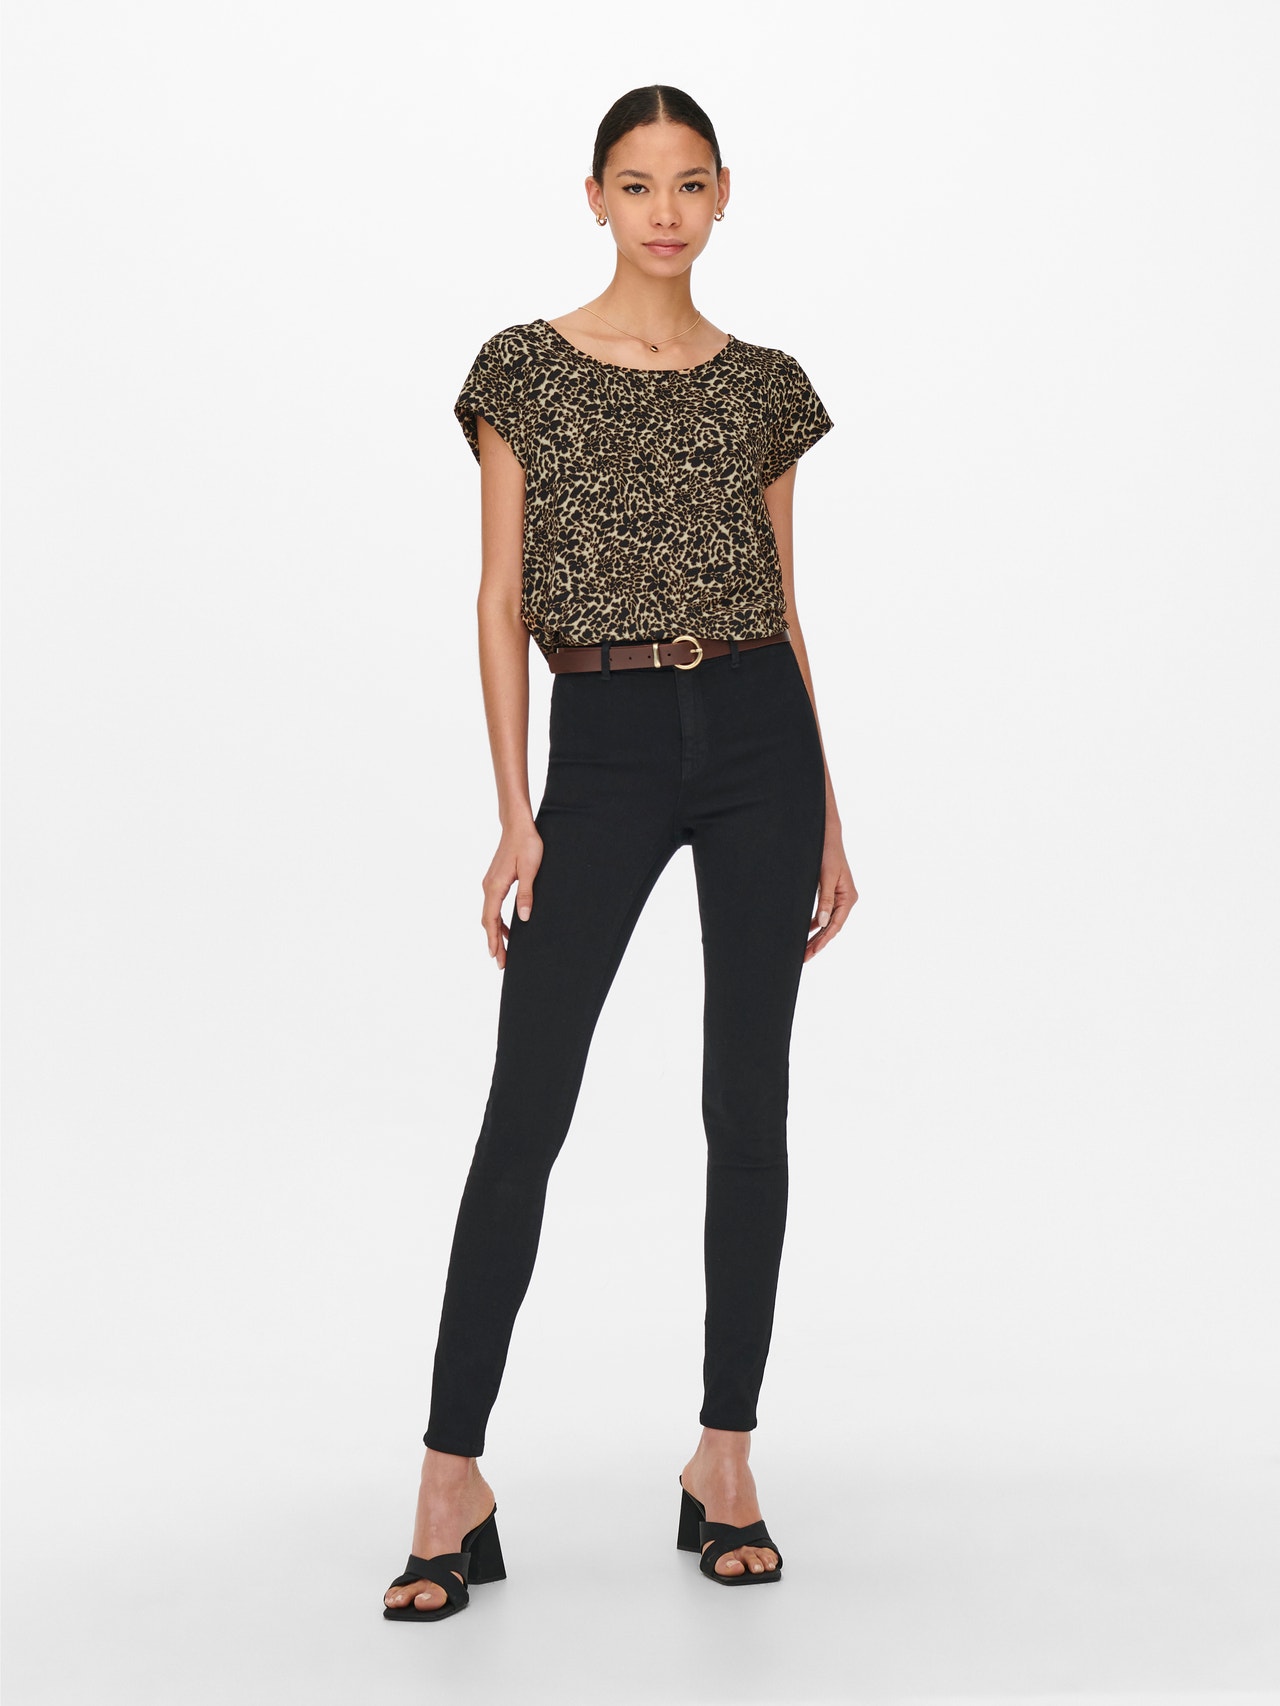 ONLY Top with print -Toasted Coconut - 15222172